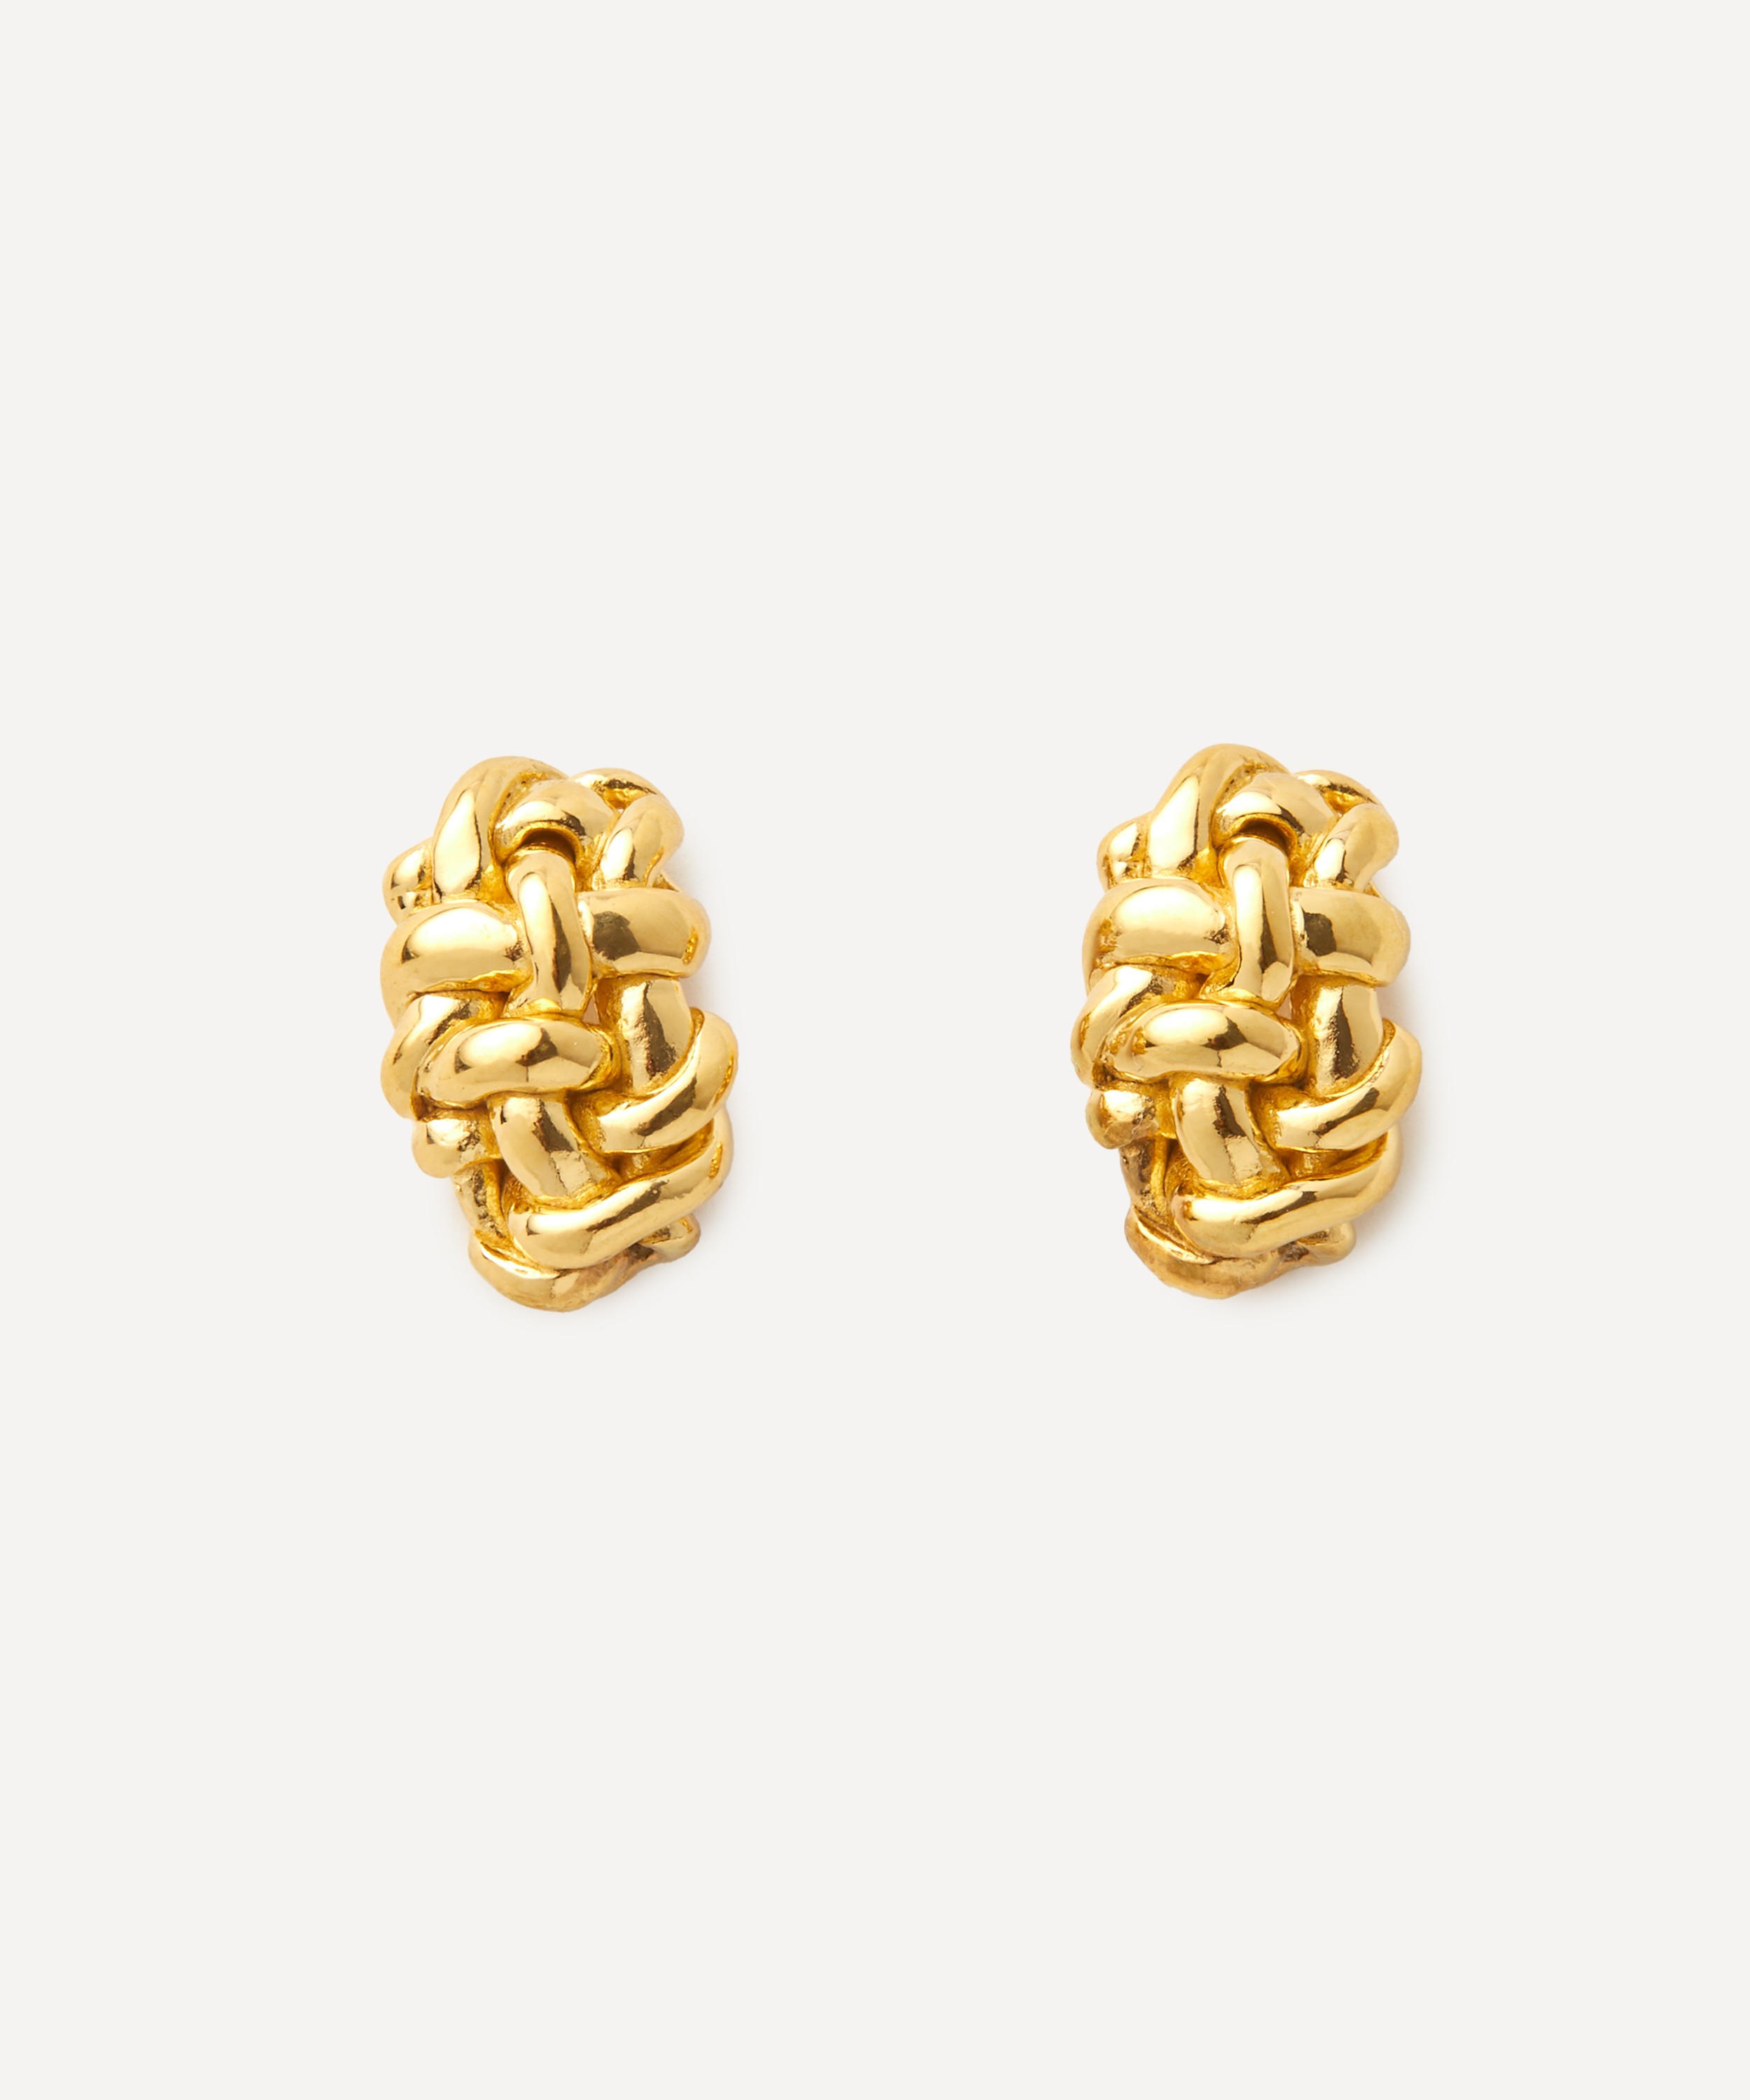 Completedworks - 18ct Gold-Plated Vermeil Silver Stud Earrings